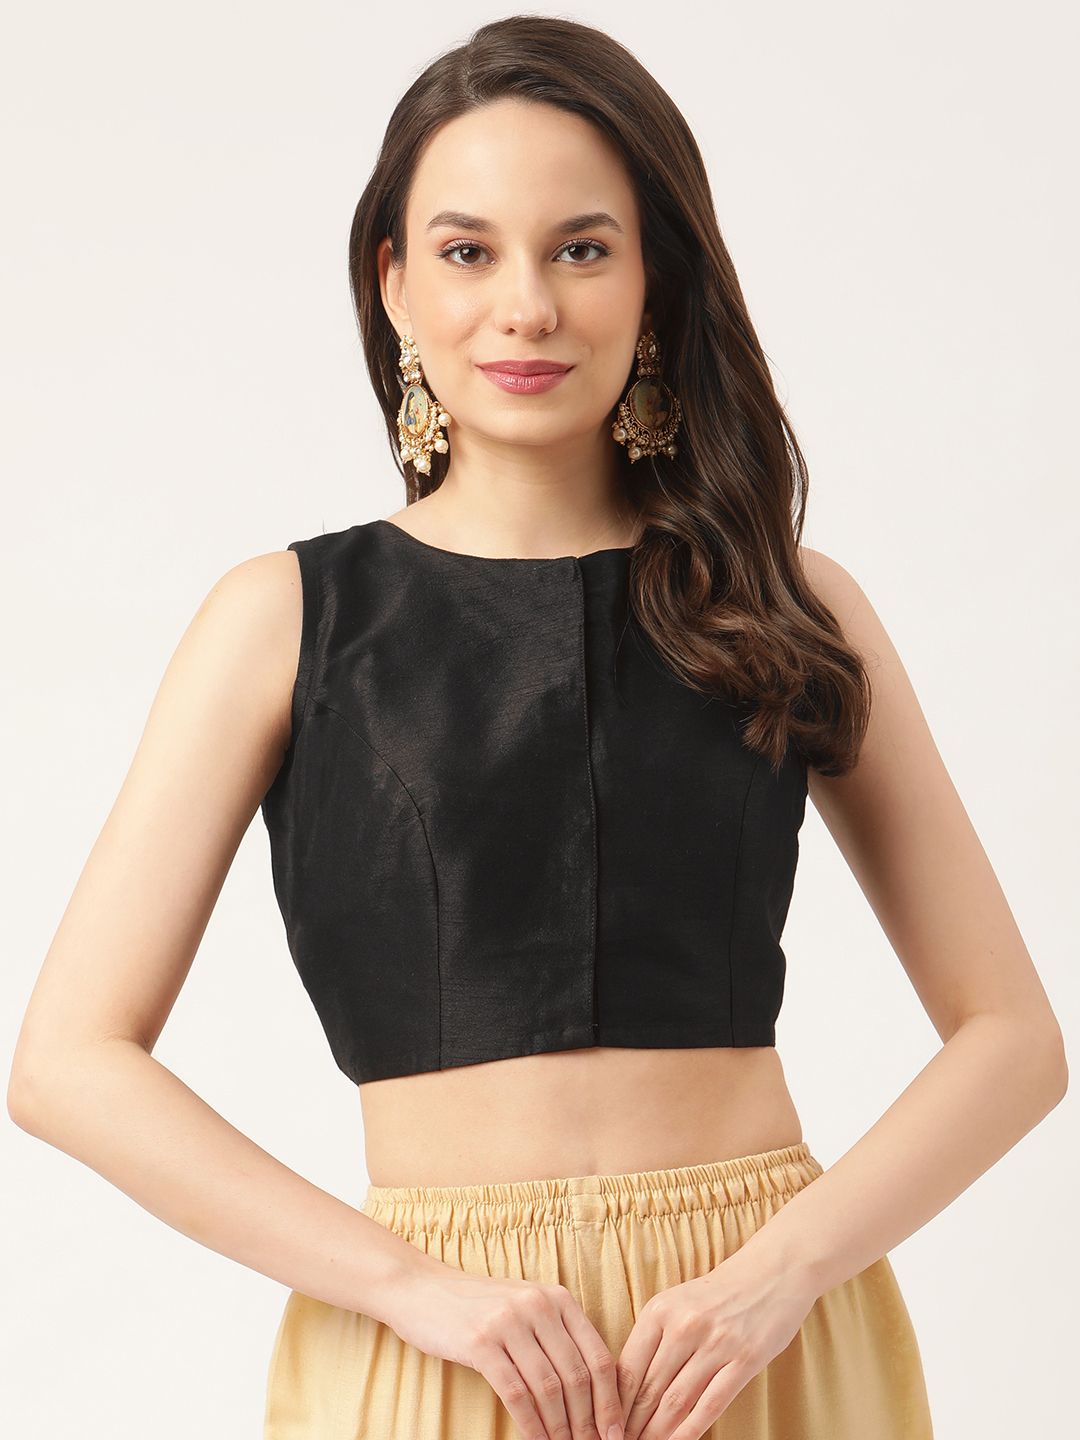 Studio Shringaar Women Black & Gold-Toned Round Neck Embroidered Blouse Price in India